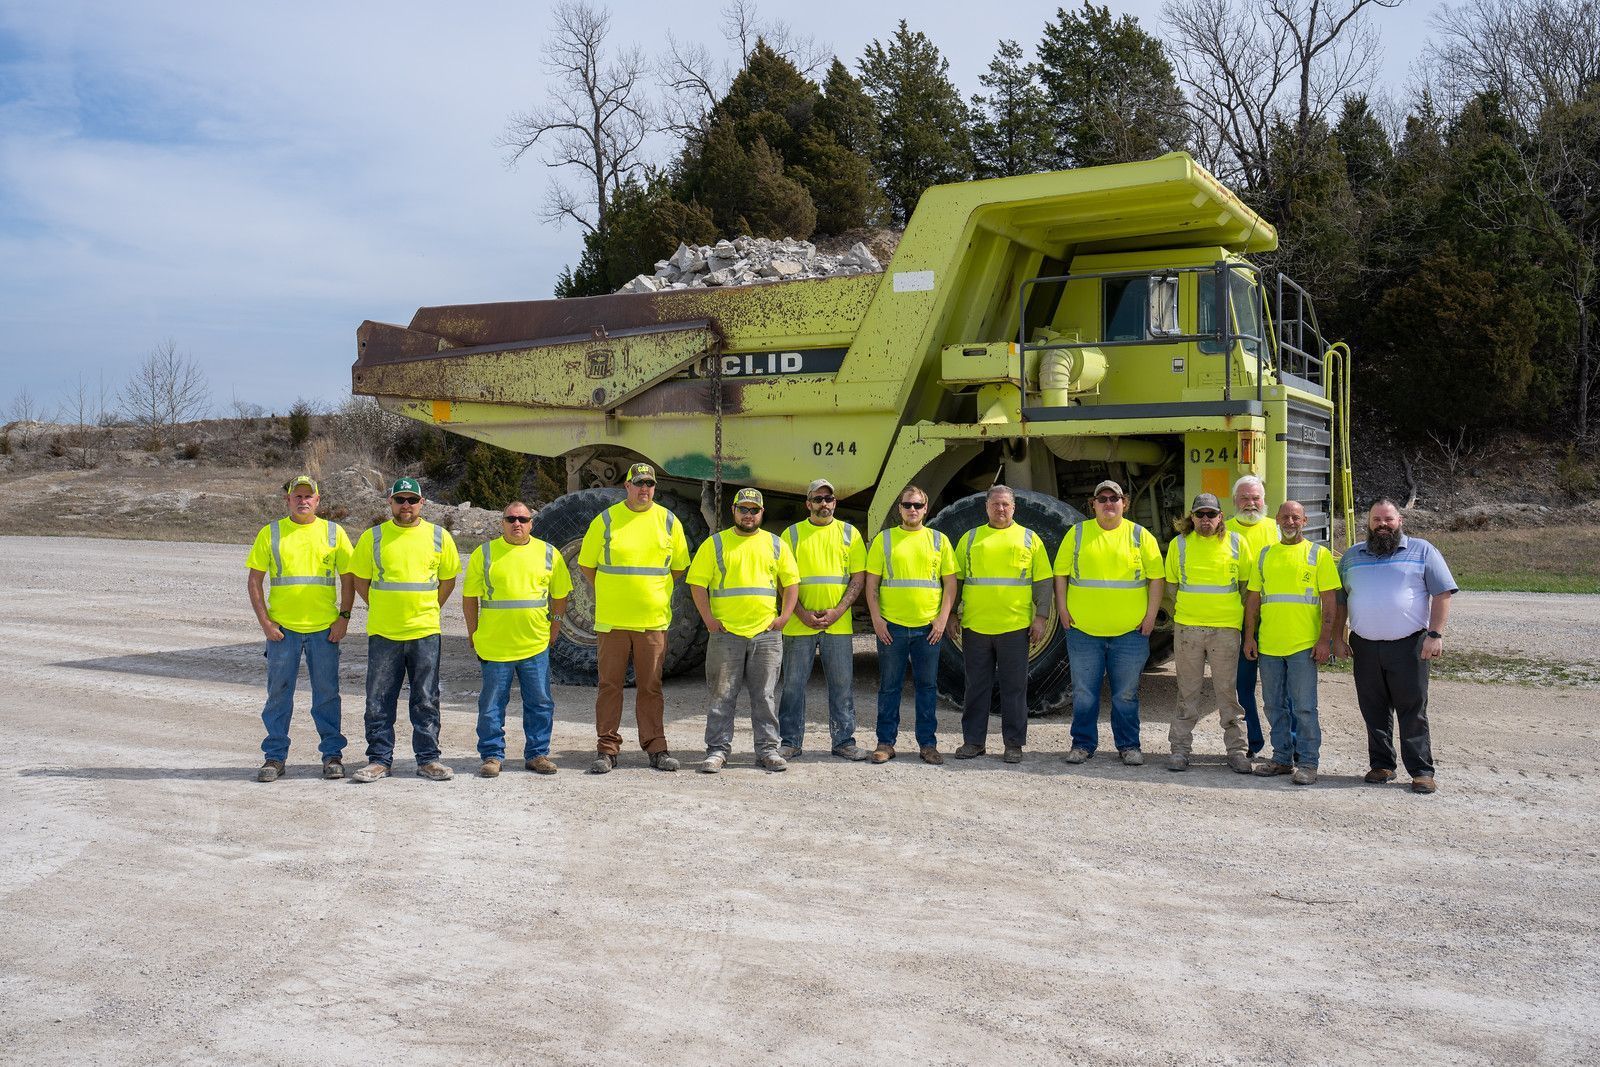 a group of construction workers are posing for a picture in front of a dump truck .